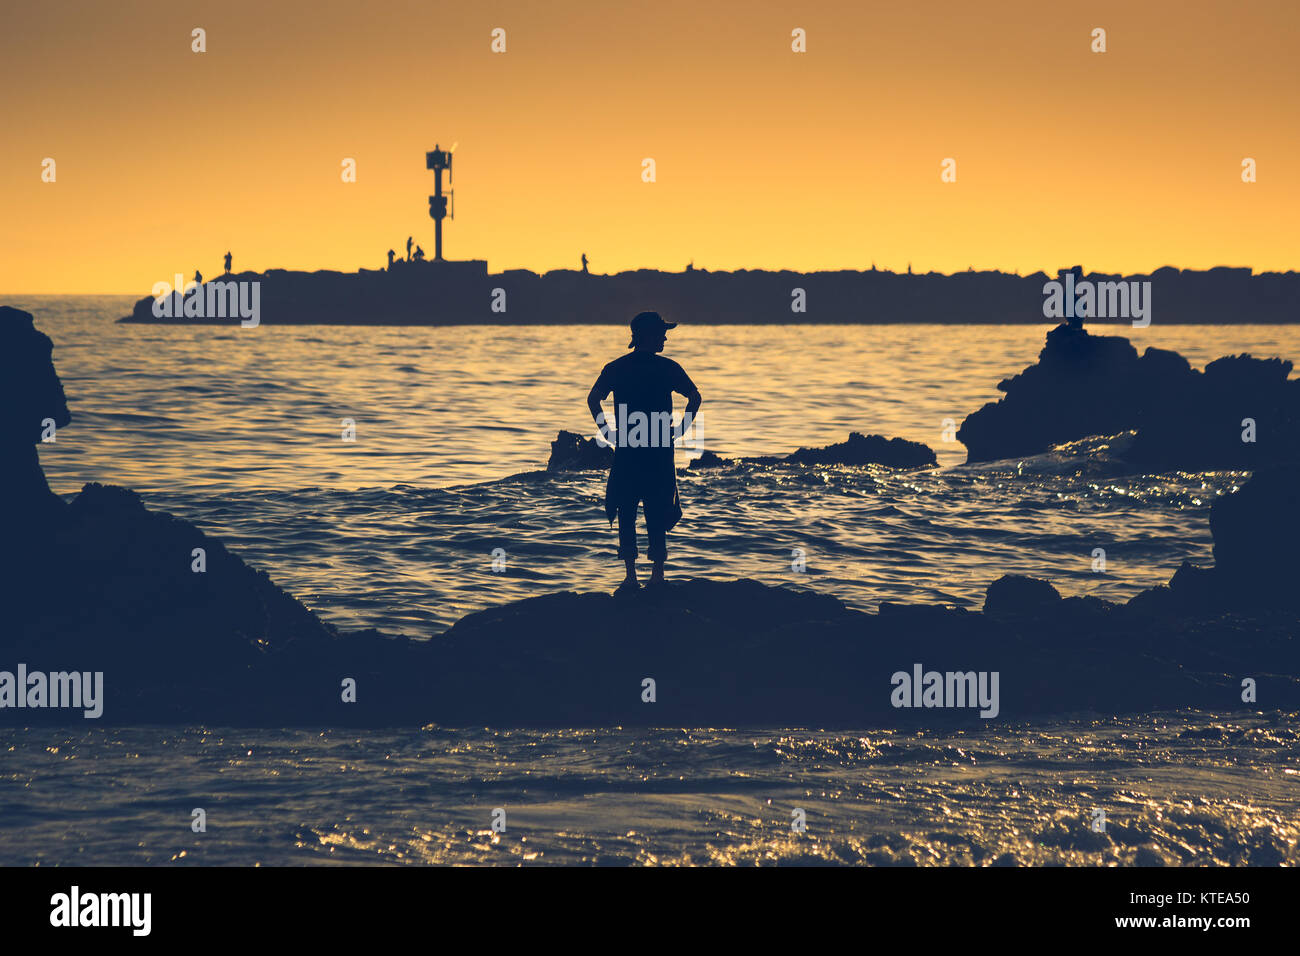 Silhouette of man posed on a rock formation at sunset from Little Corona Beach, Corona Del Mar, California with people fishing from a jetty in the bac Stock Photo